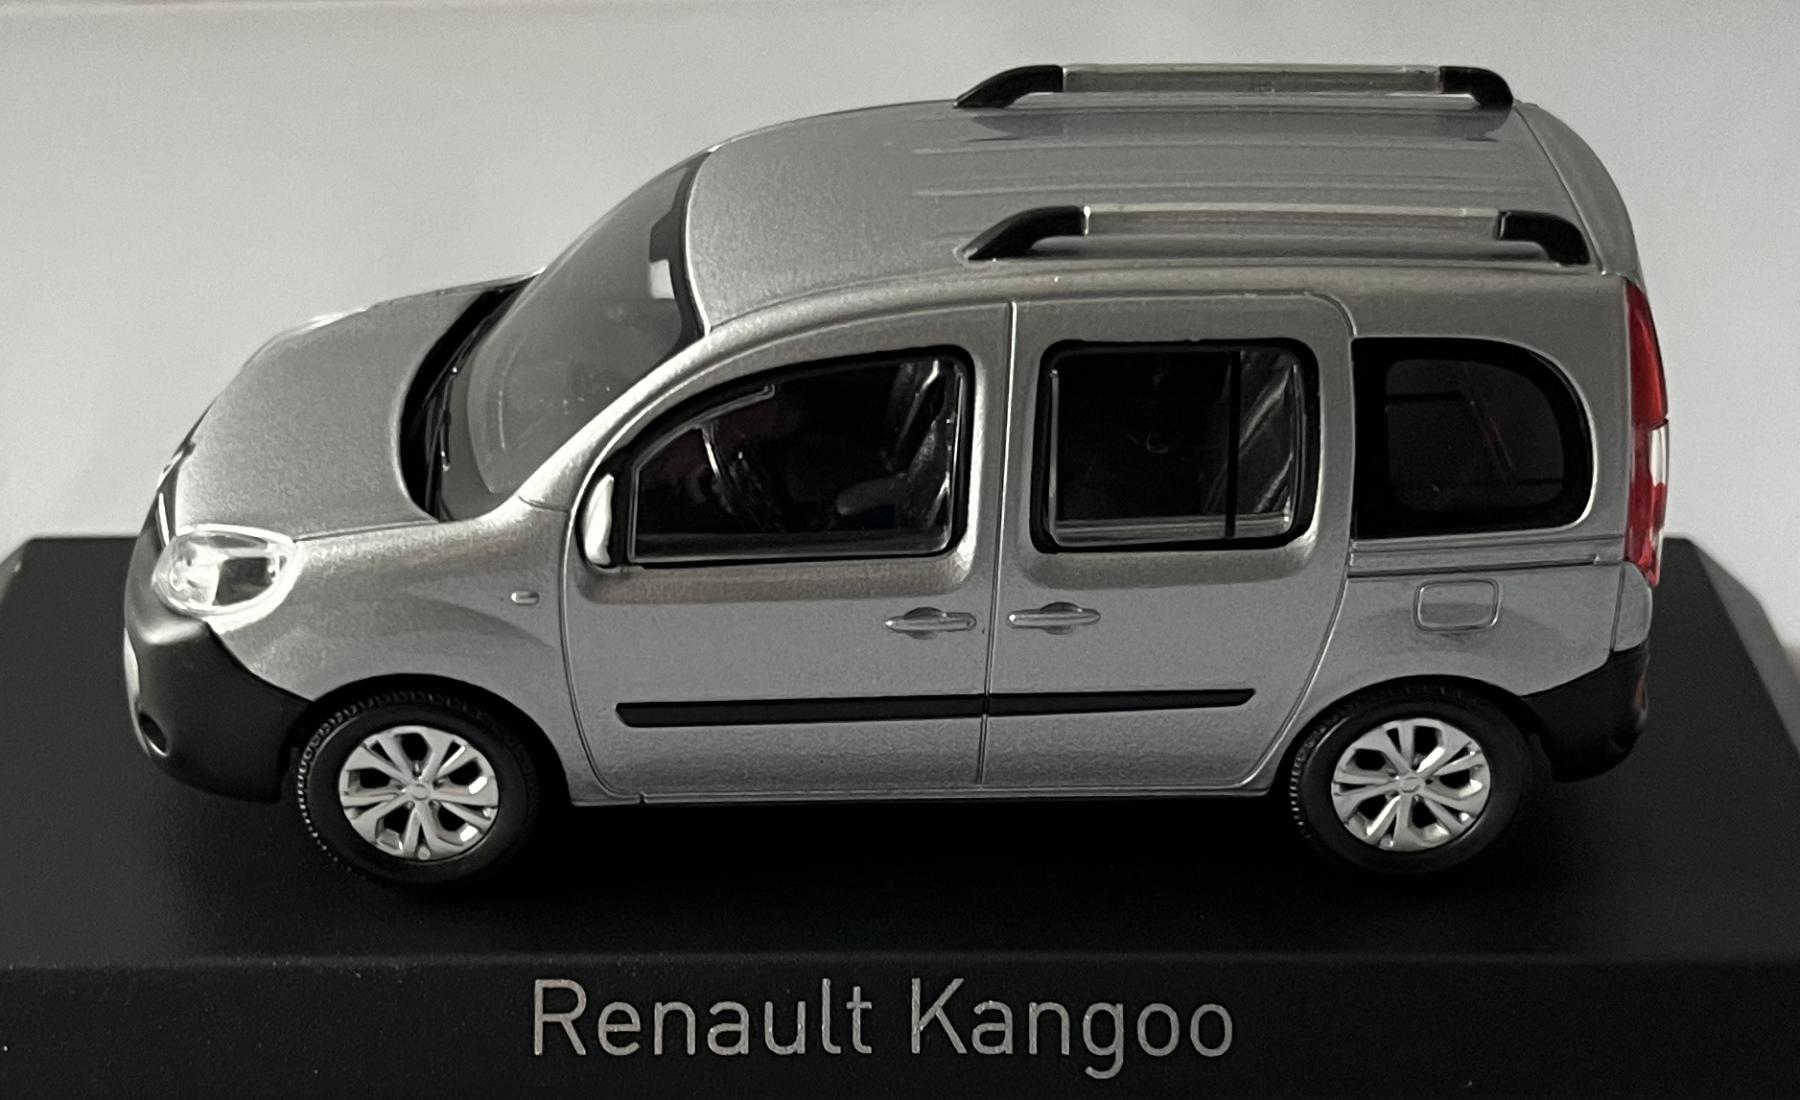 Renault Kangoo 2013 in silver, 1:43 scale diecast car model from Norev,  5111377